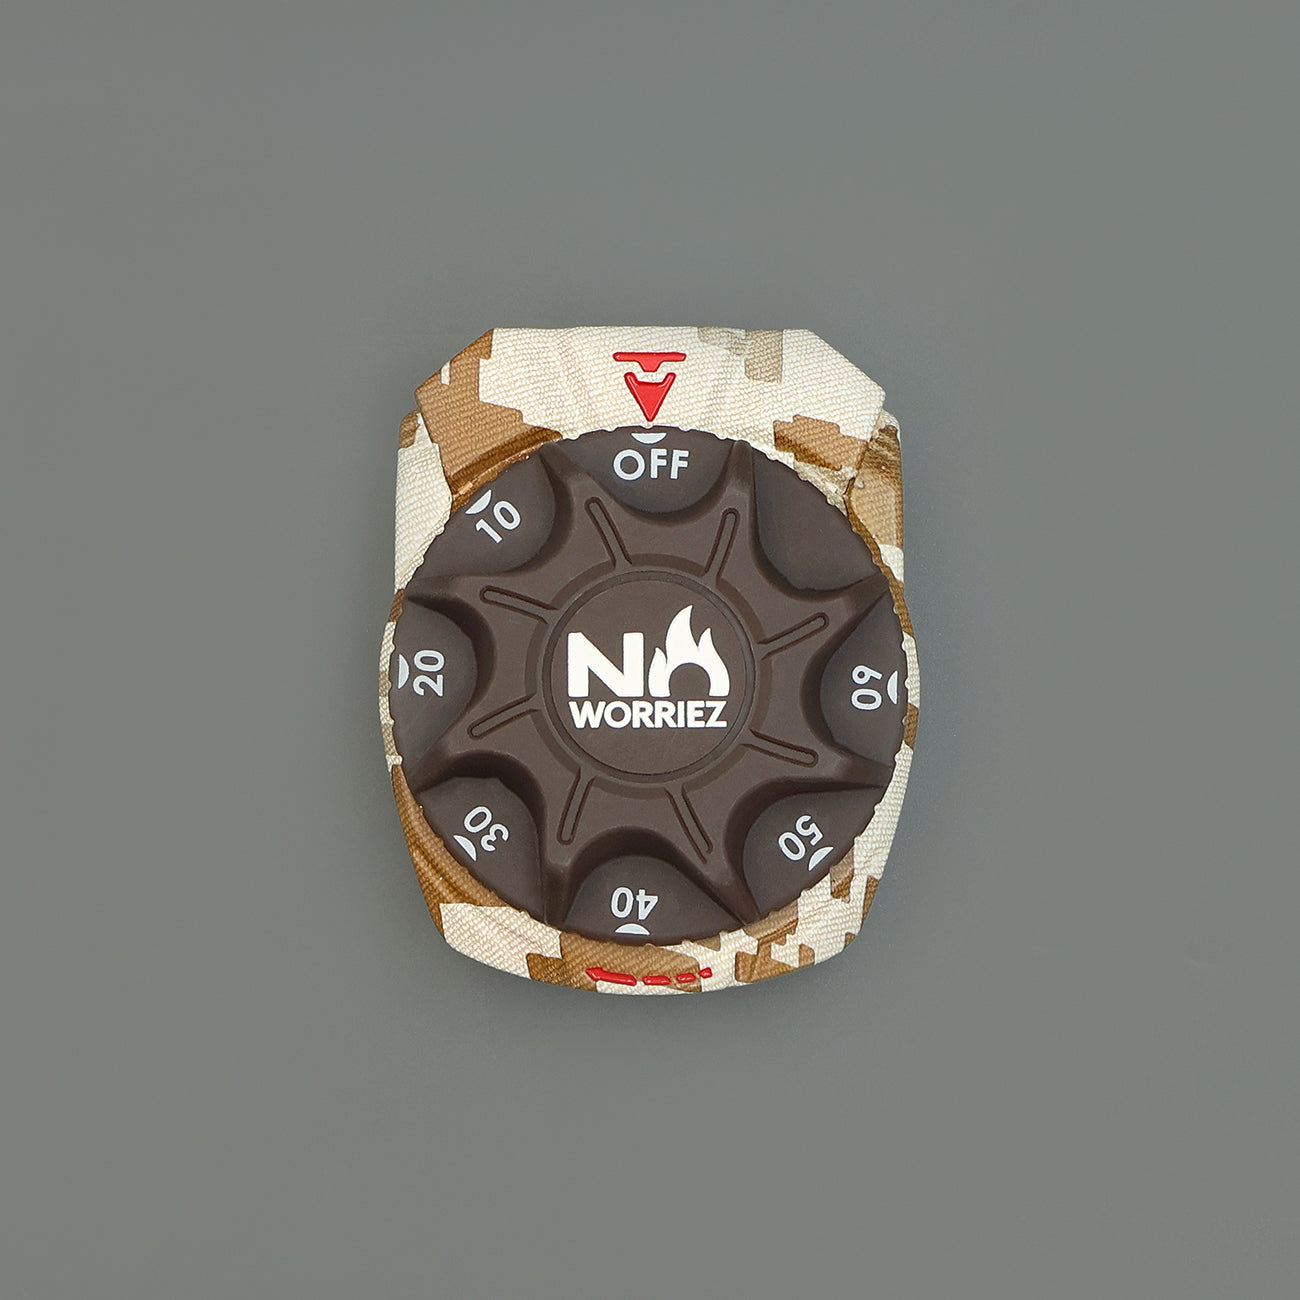 CAMO-printed Gas Grill Shut Off Timer front look